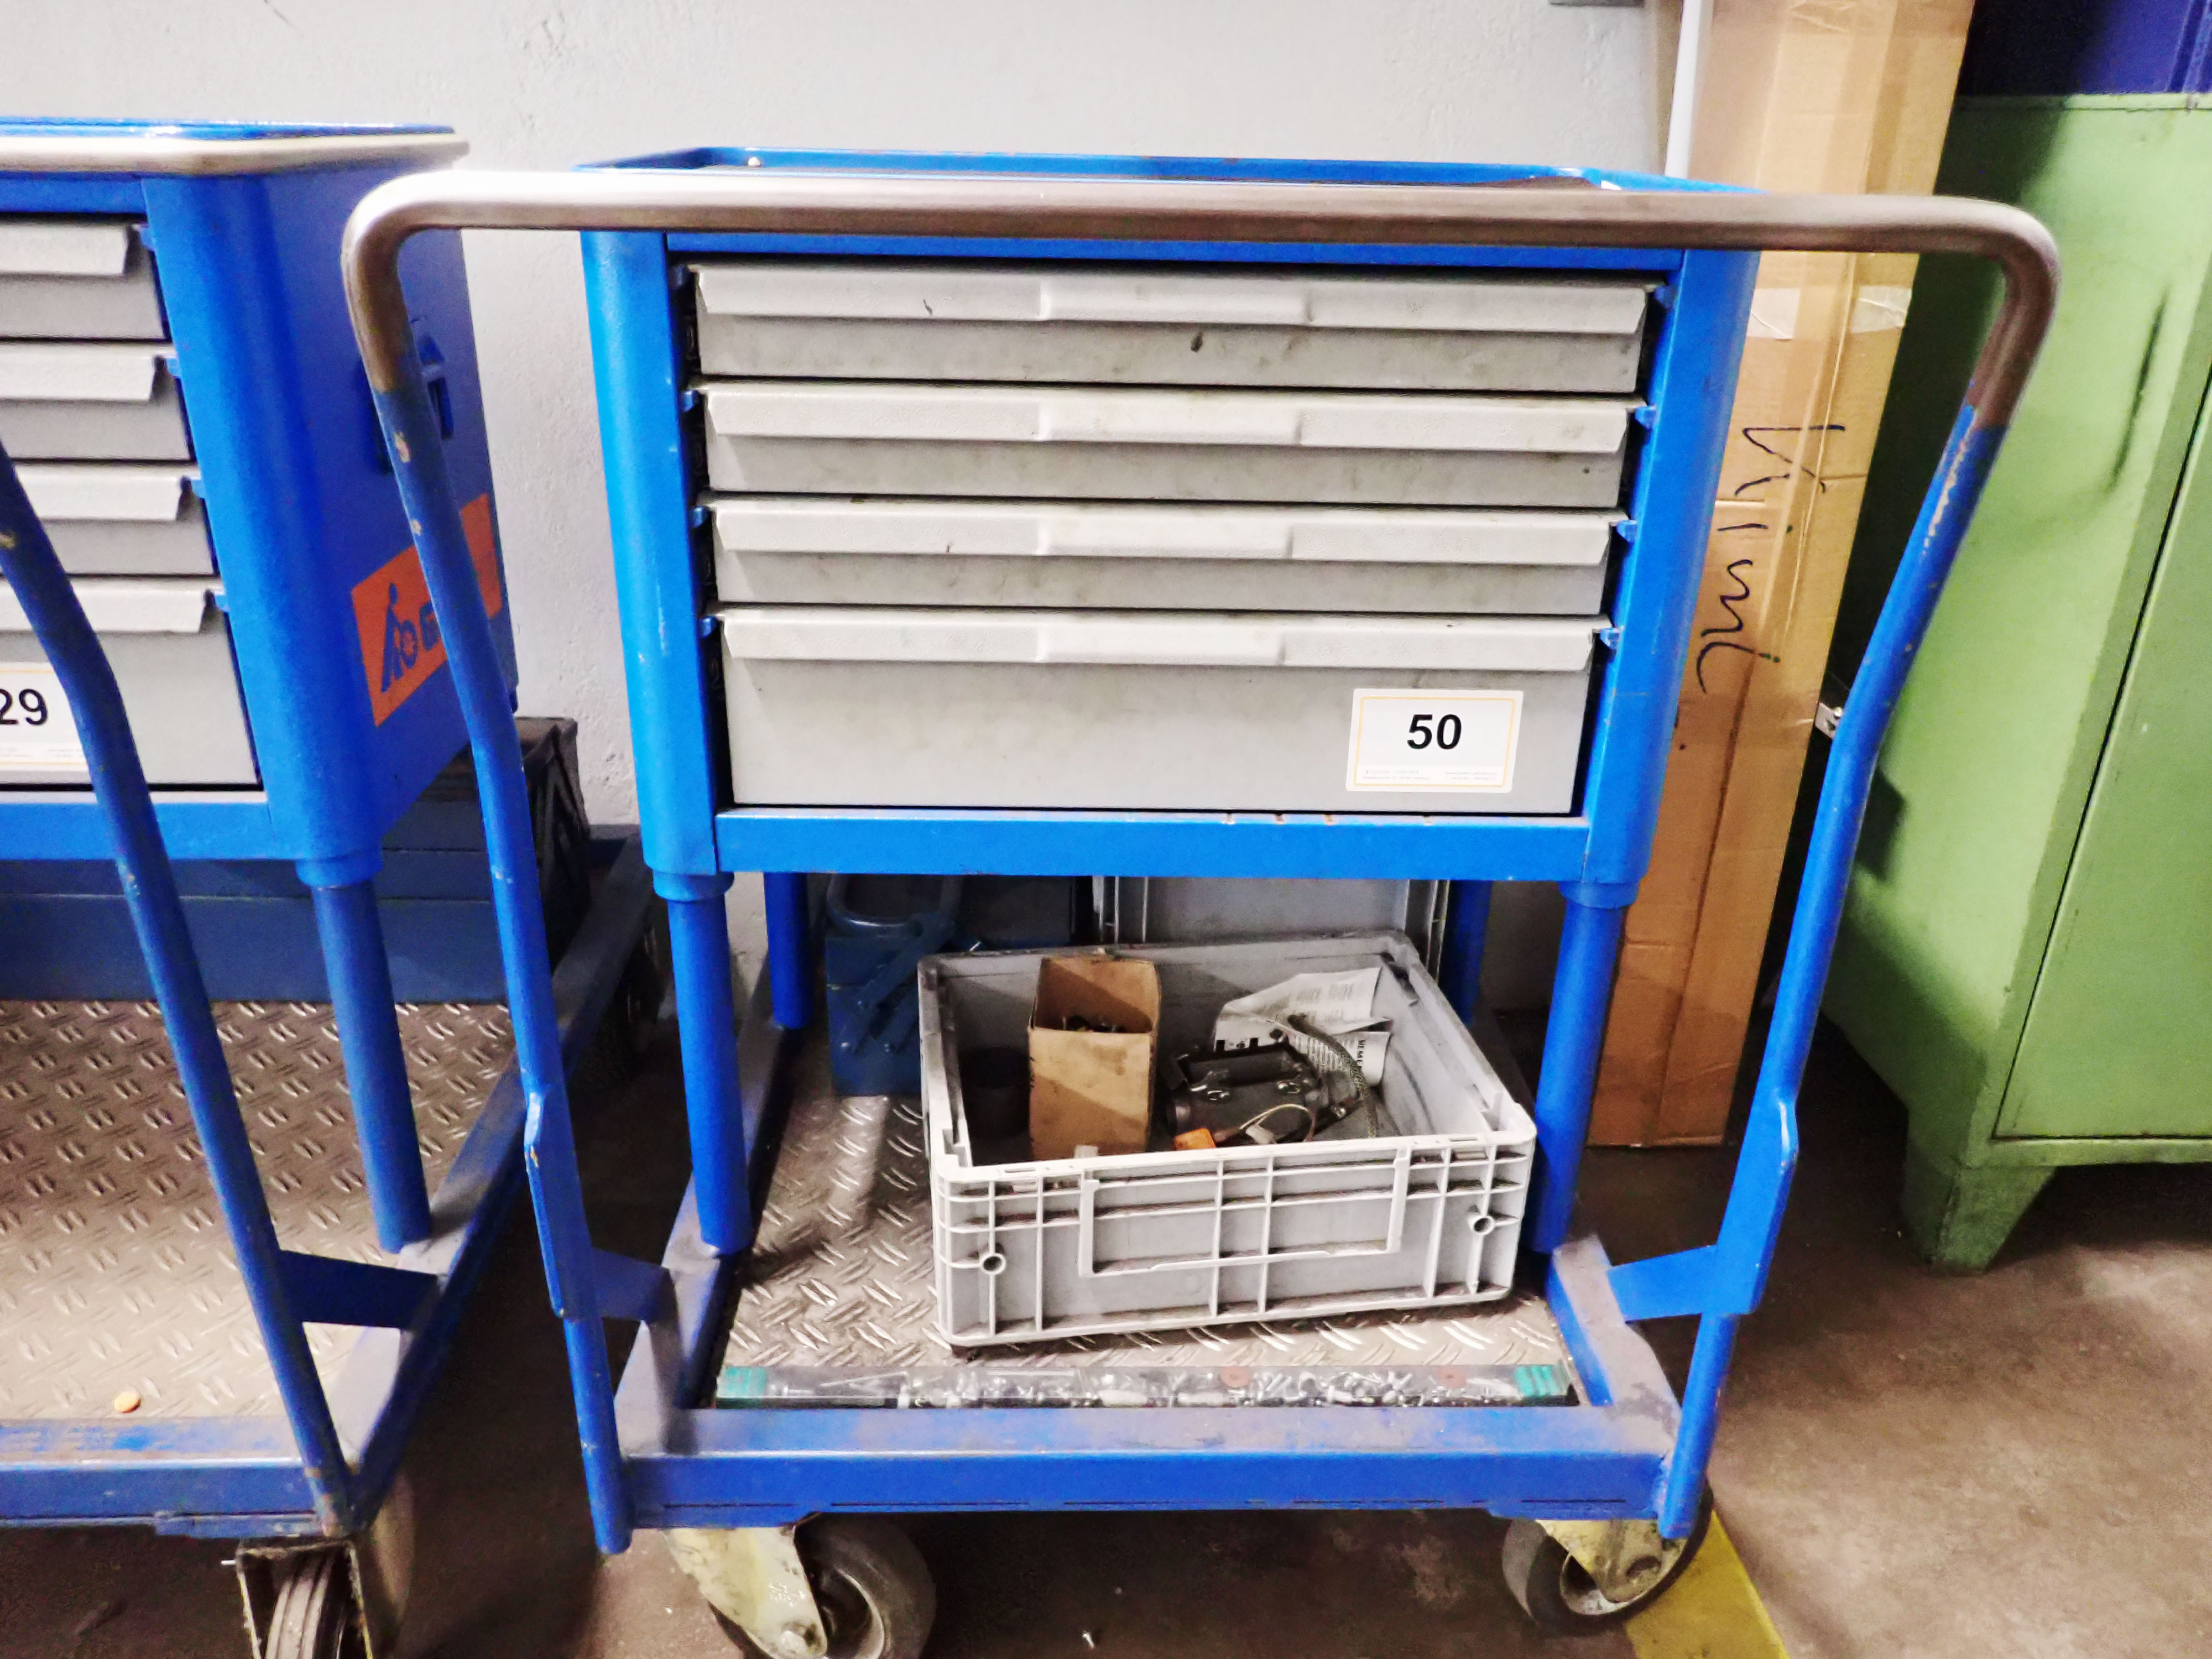 Pos.  50:  Werkzeugschubladencontainer – Lot  50:  Tool drawer container